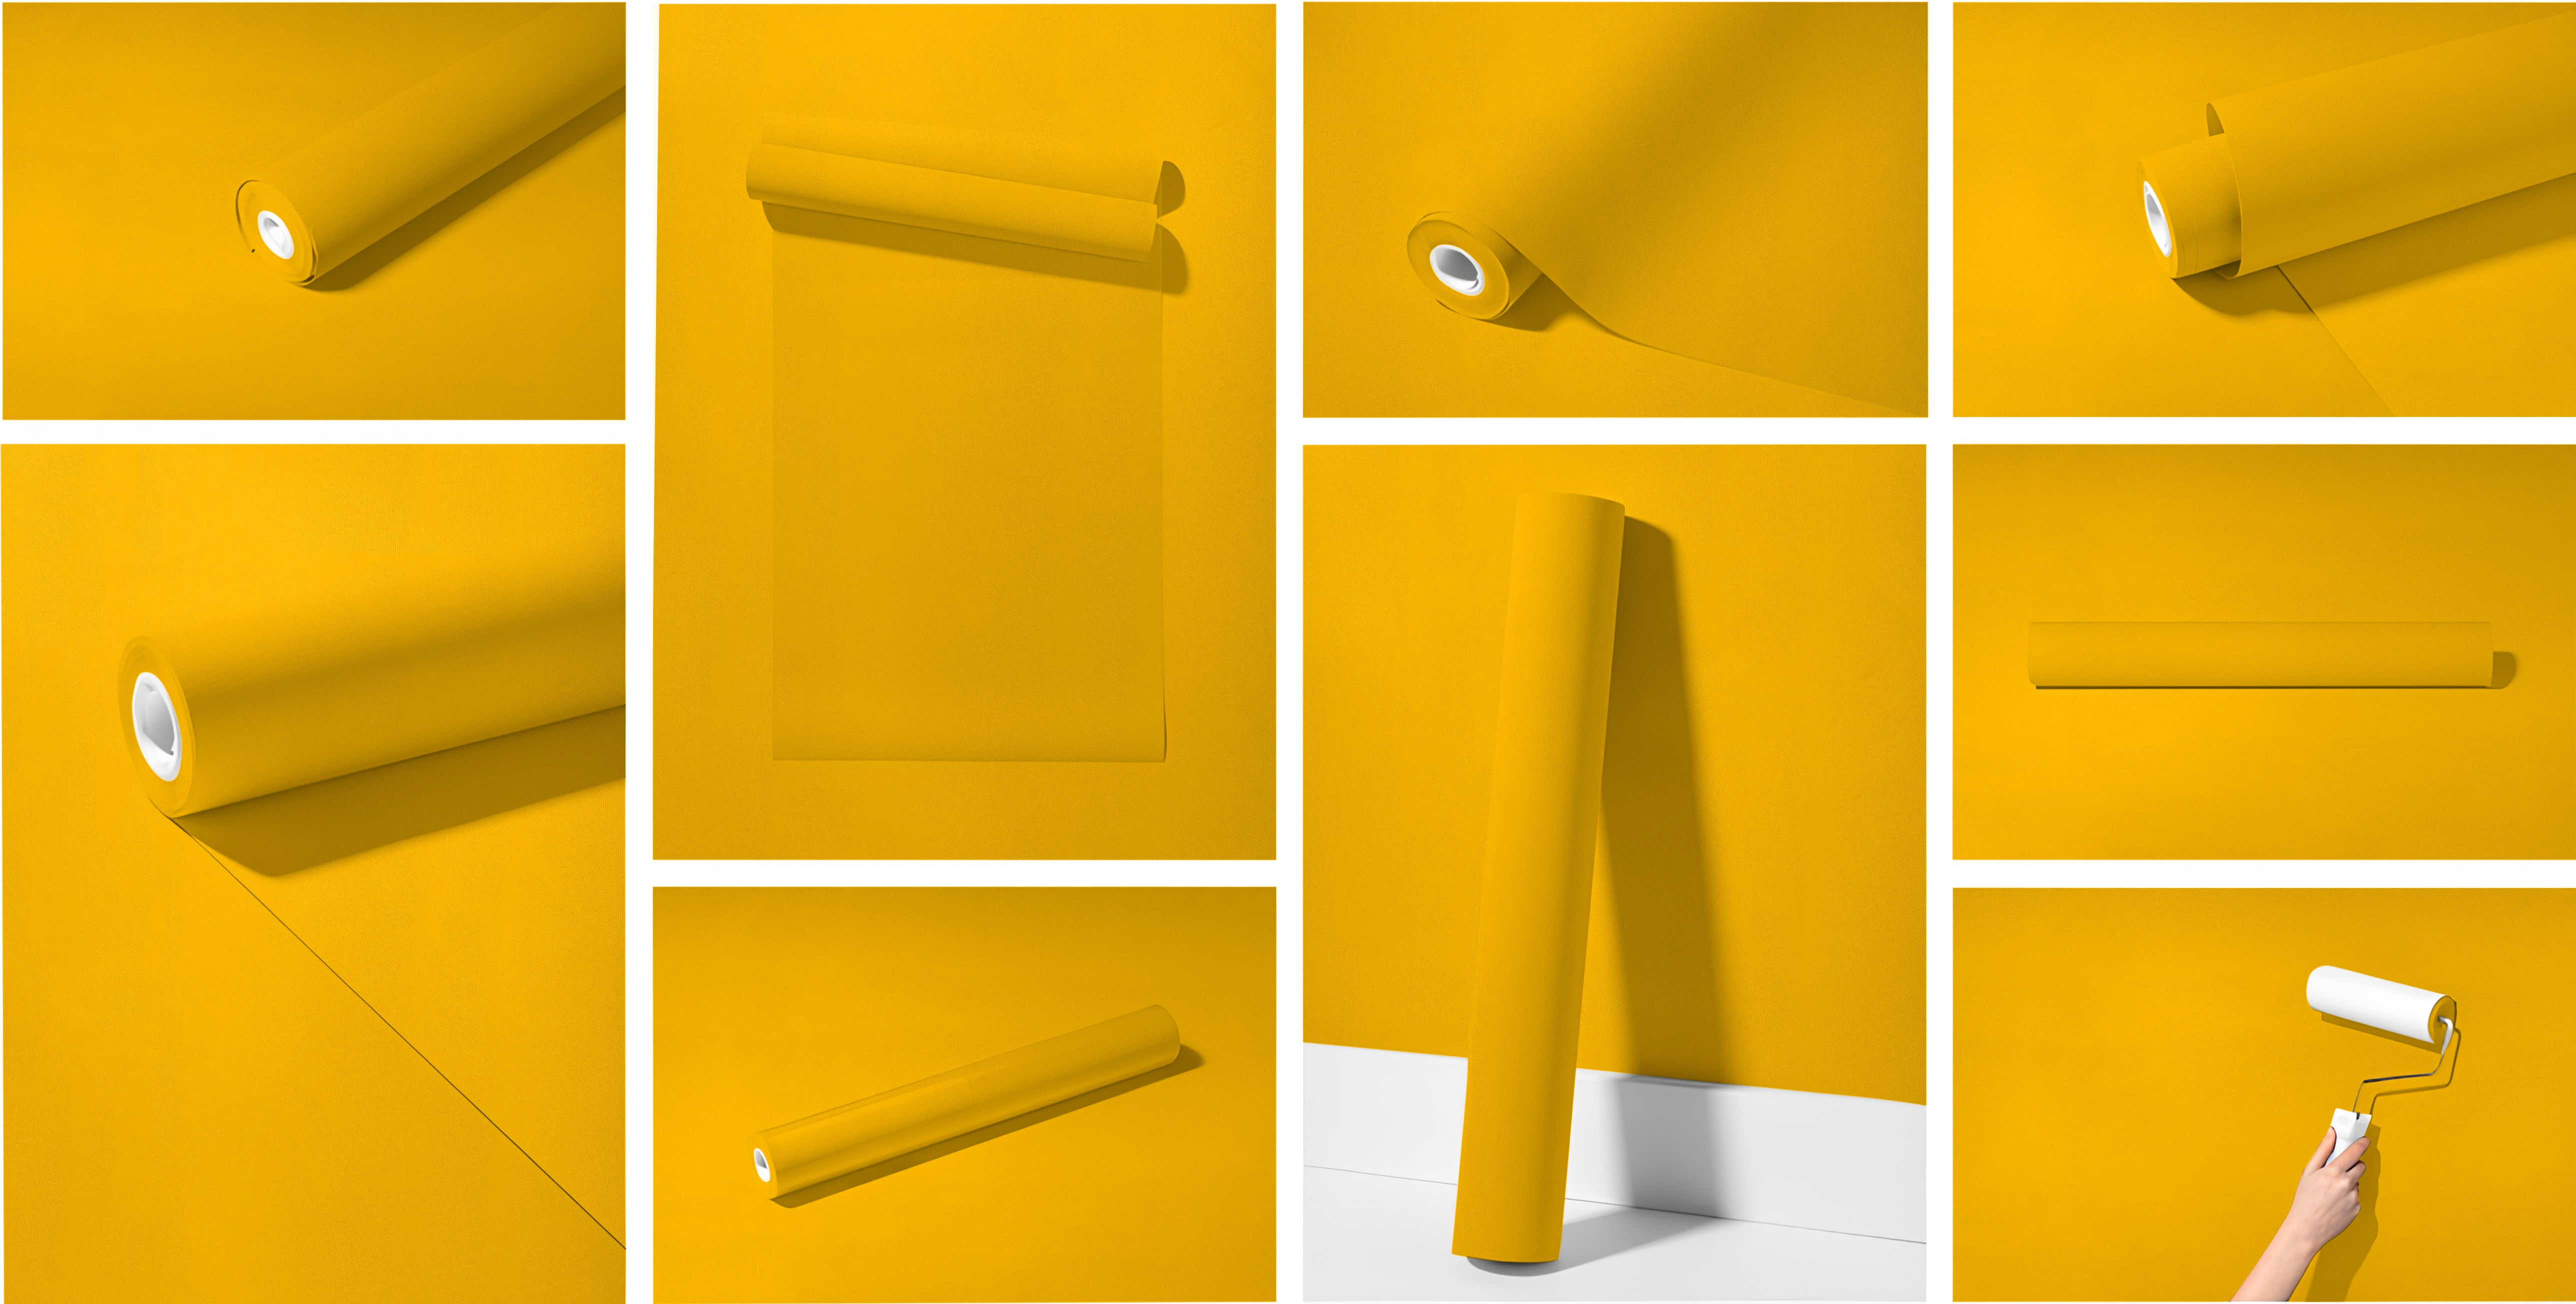 Peel & Stick Removable Re-usable Paint - Color RAL 1023 Traffic Yellow - offRAL™ - RALRAW LLC, USA